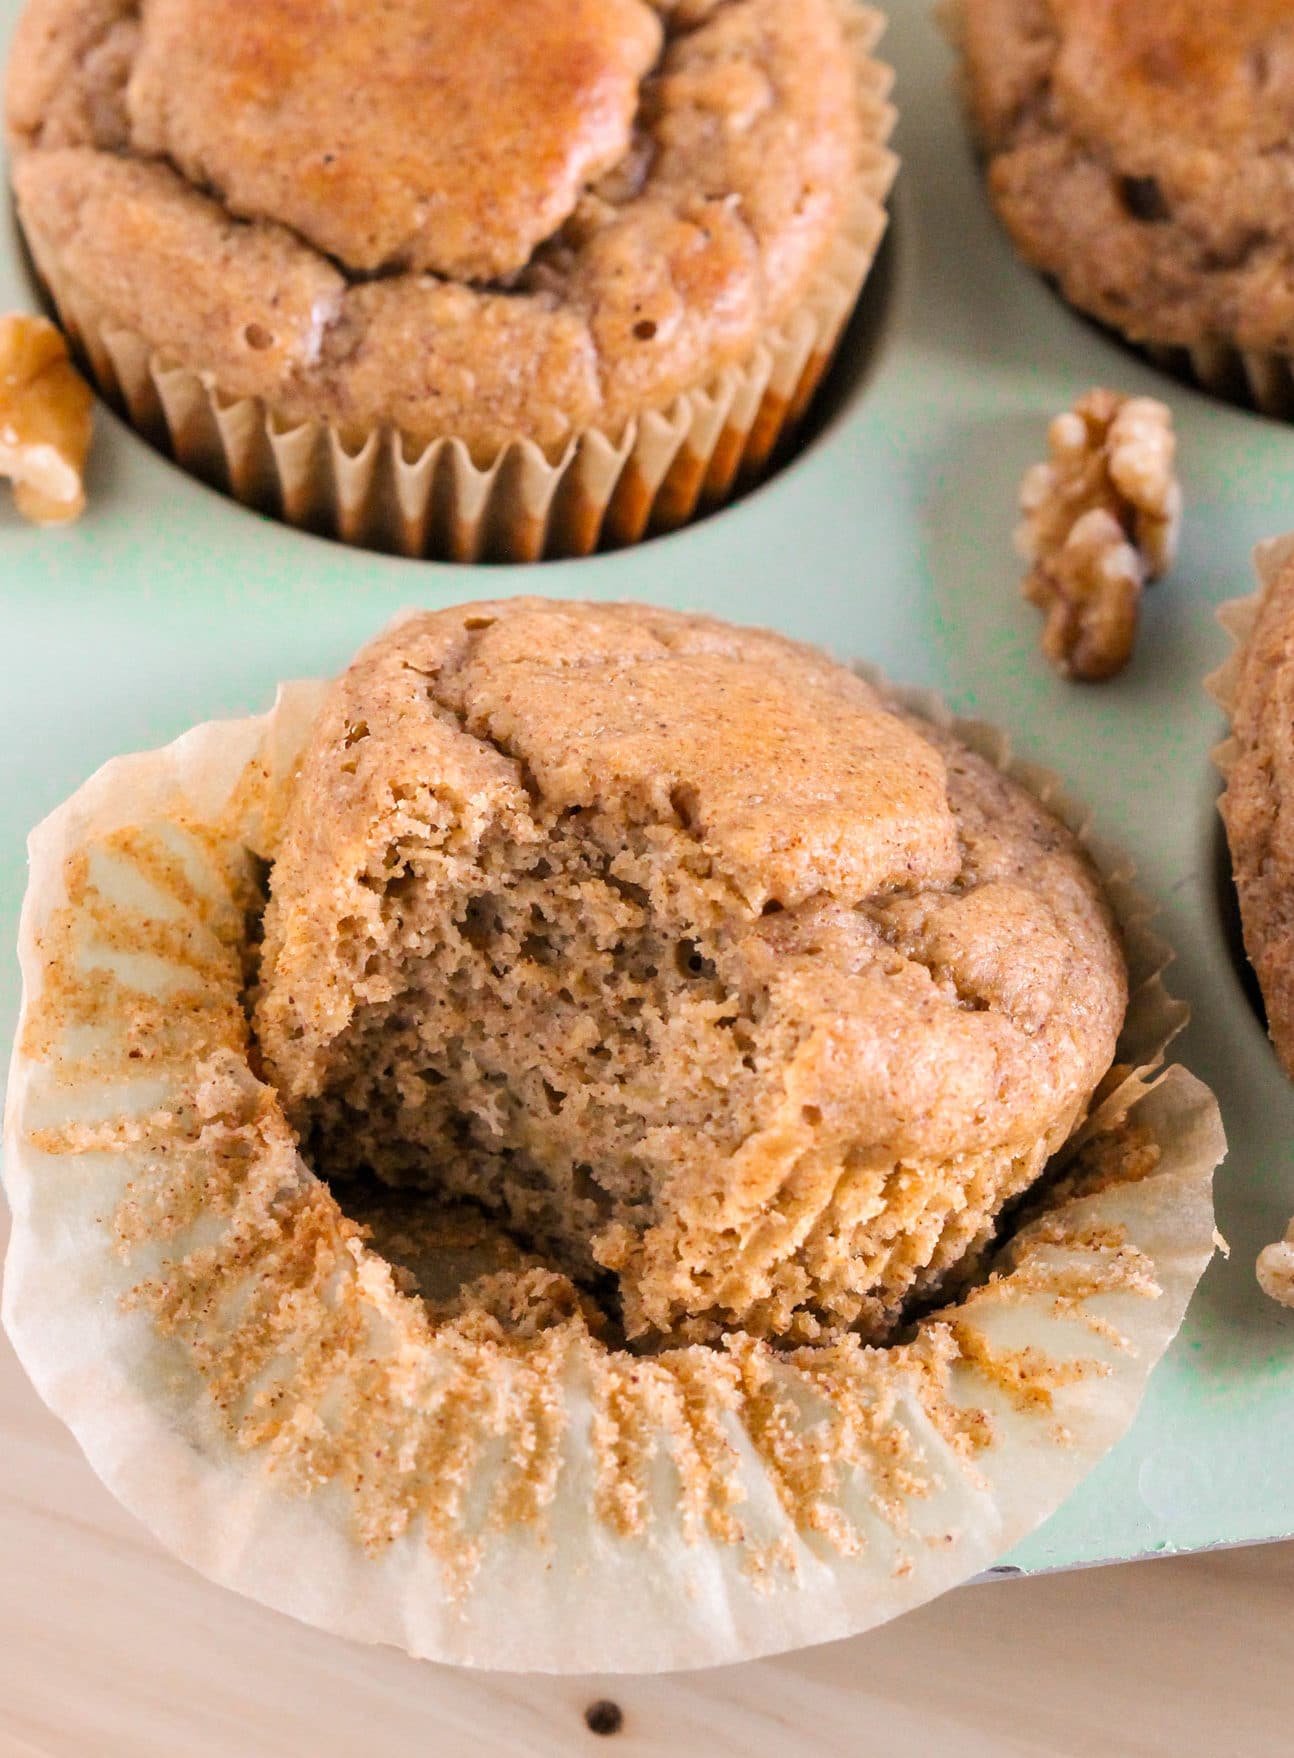 These are the ULTIMATE Healthy Banana Muffins! So fluffy, moist, sweet, and packed with banana bread flavor, you’d never guess that these have NO butter and NO sugar added. These Banana Muffins are low calorie, low fat, refined sugar free, gluten free, AND dairy free, but they sure don’t taste like it! Healthy Dessert Recipes at the Desserts With Benefits Blog (www.DessertsWithBenefits.com)